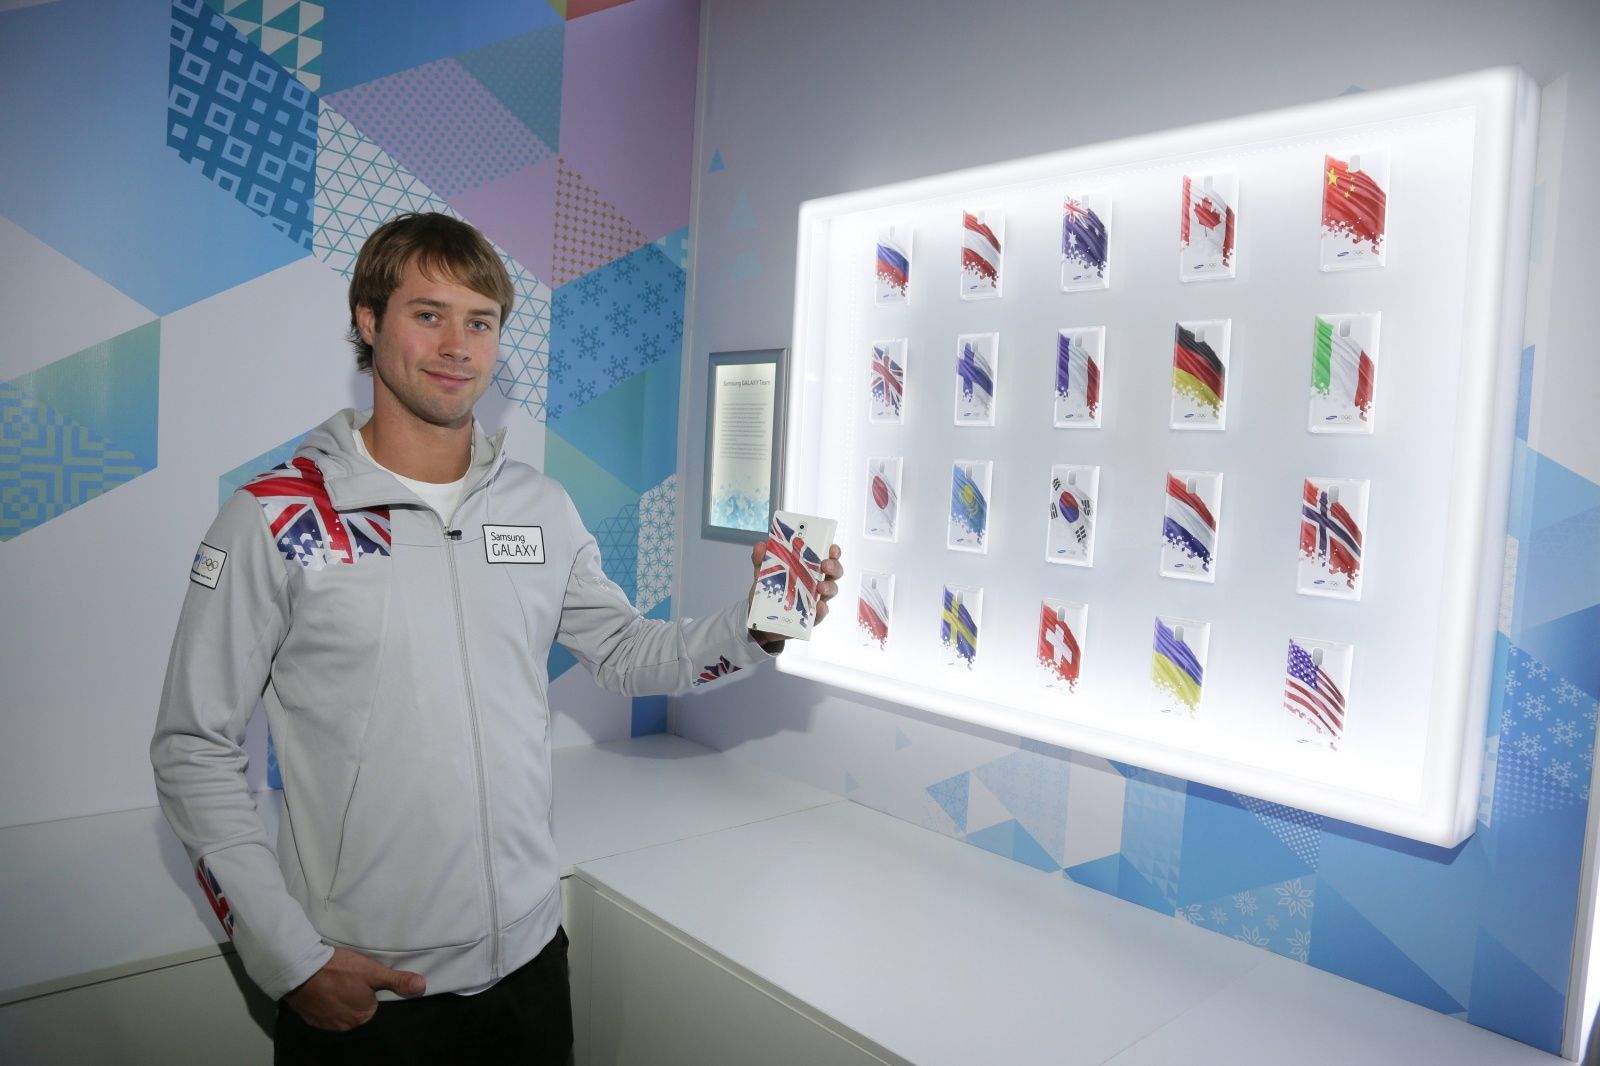 Olympic athletes receive Note 3 phones with their country's flag on the back.